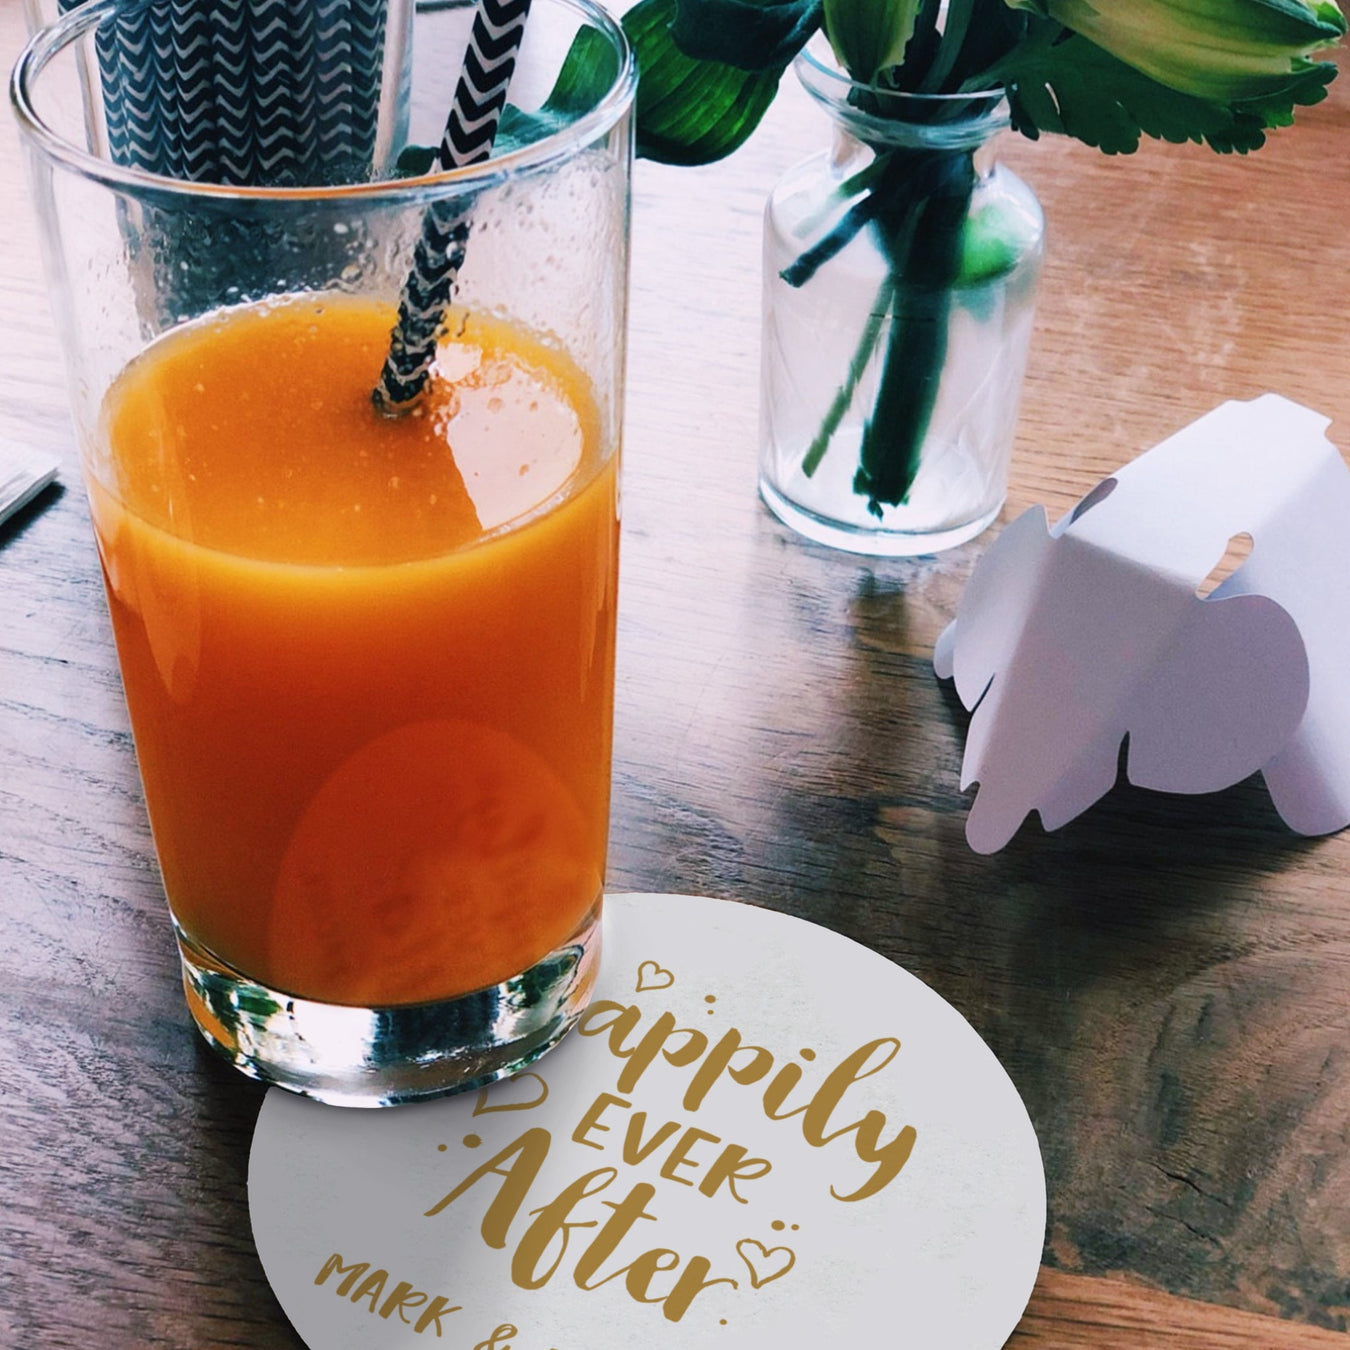 A tablescape is shown with a drink glass on a coaster, a vase, and an origami elephant. The coaster underneatht the glass reads "Happily Ever After Mark & Rachel".